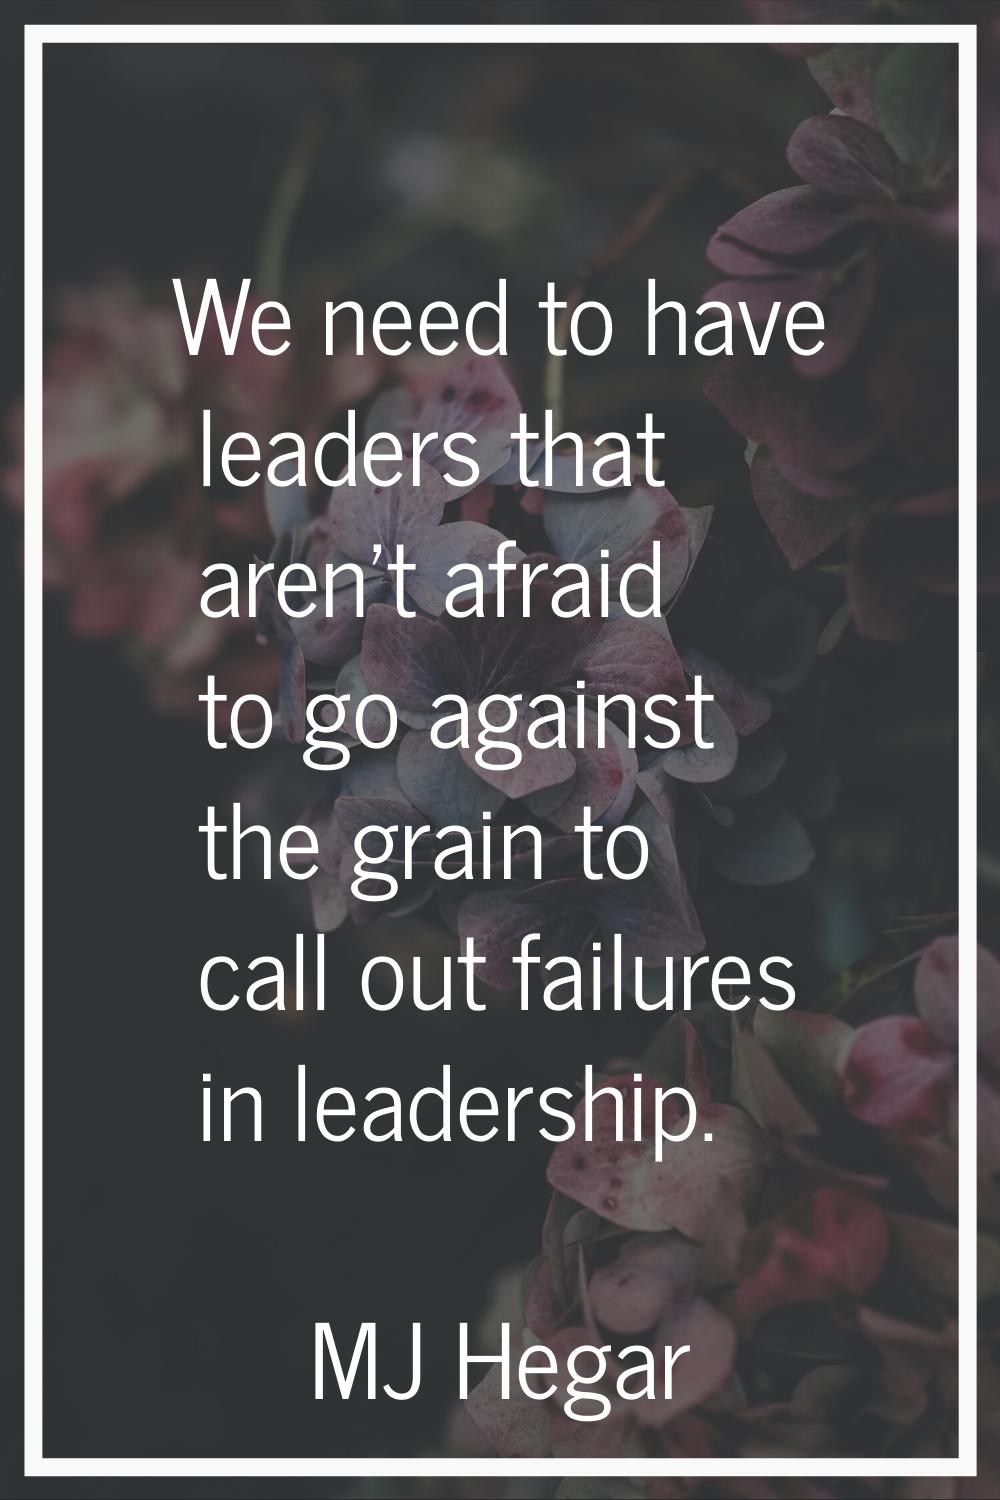 We need to have leaders that aren't afraid to go against the grain to call out failures in leadersh